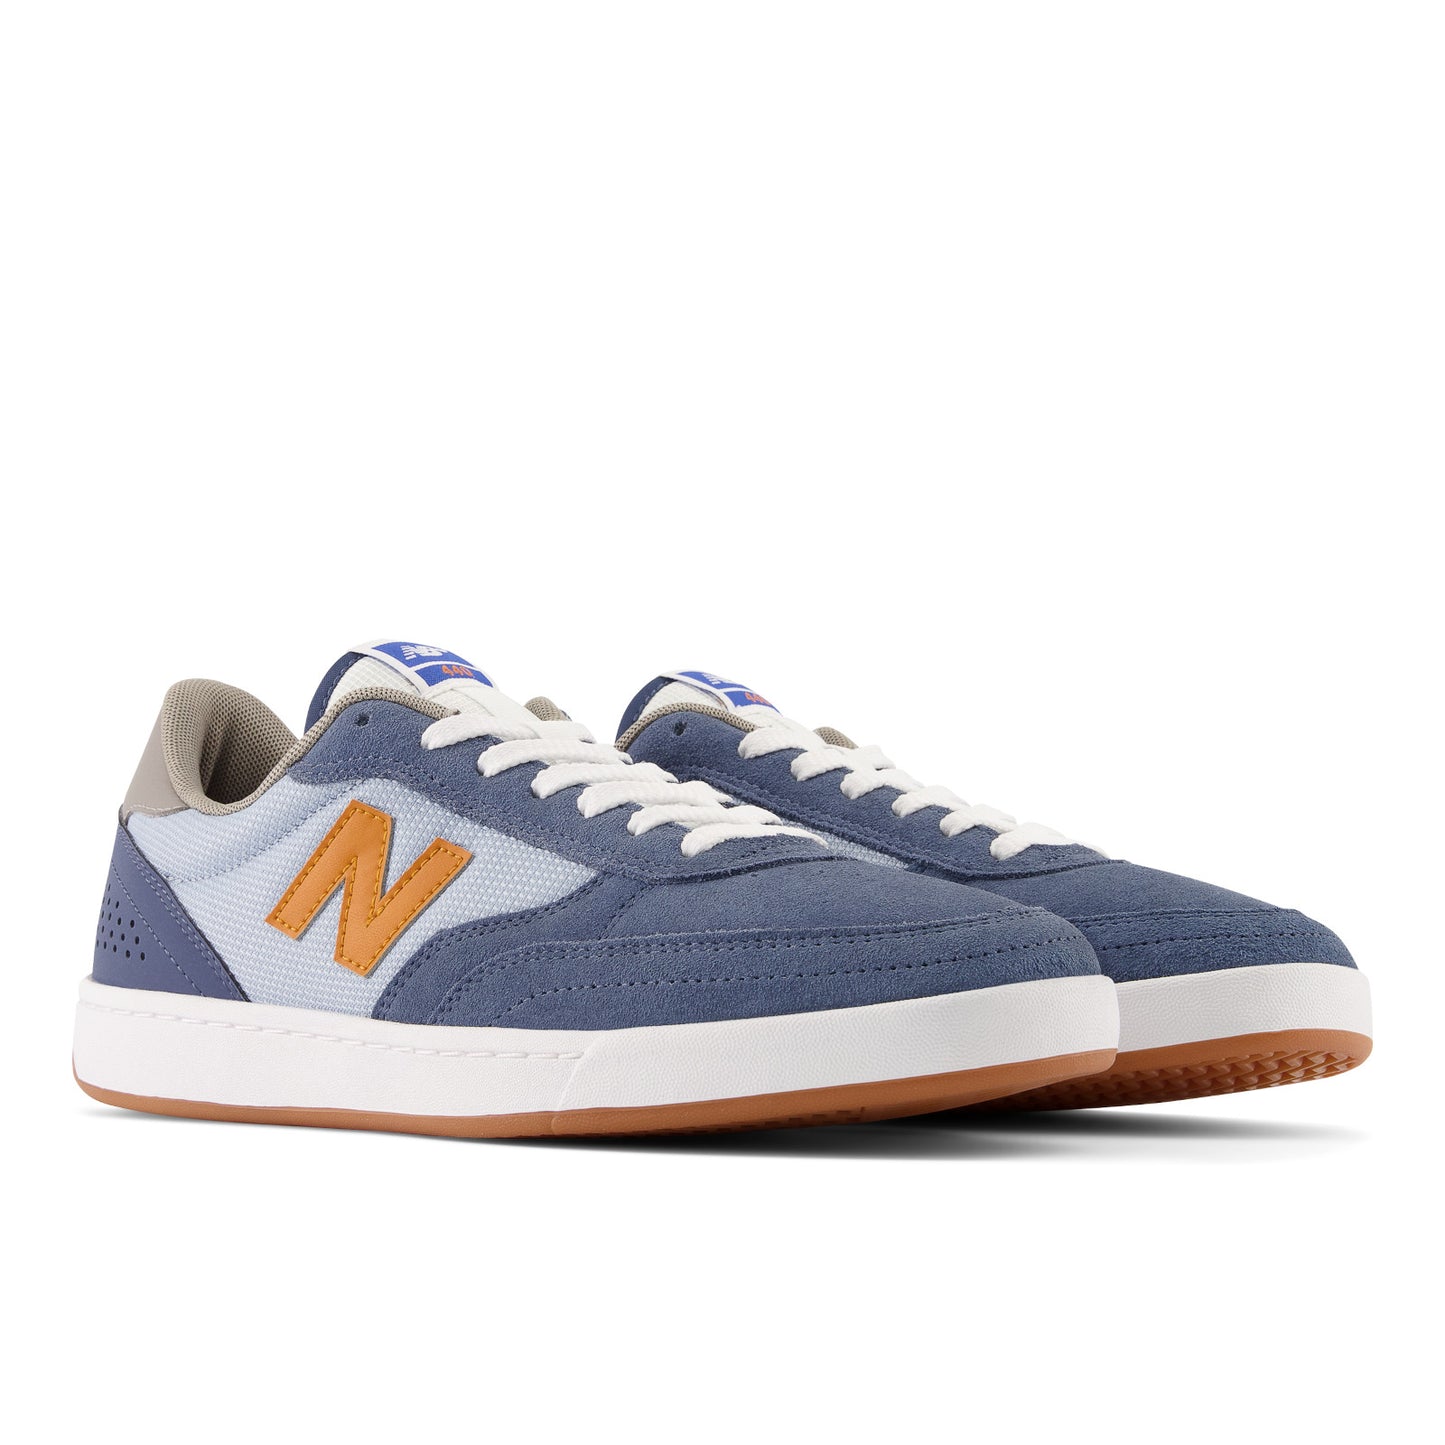 New Balance Numeric '440' Skate Shoes (Navy / Yellow)